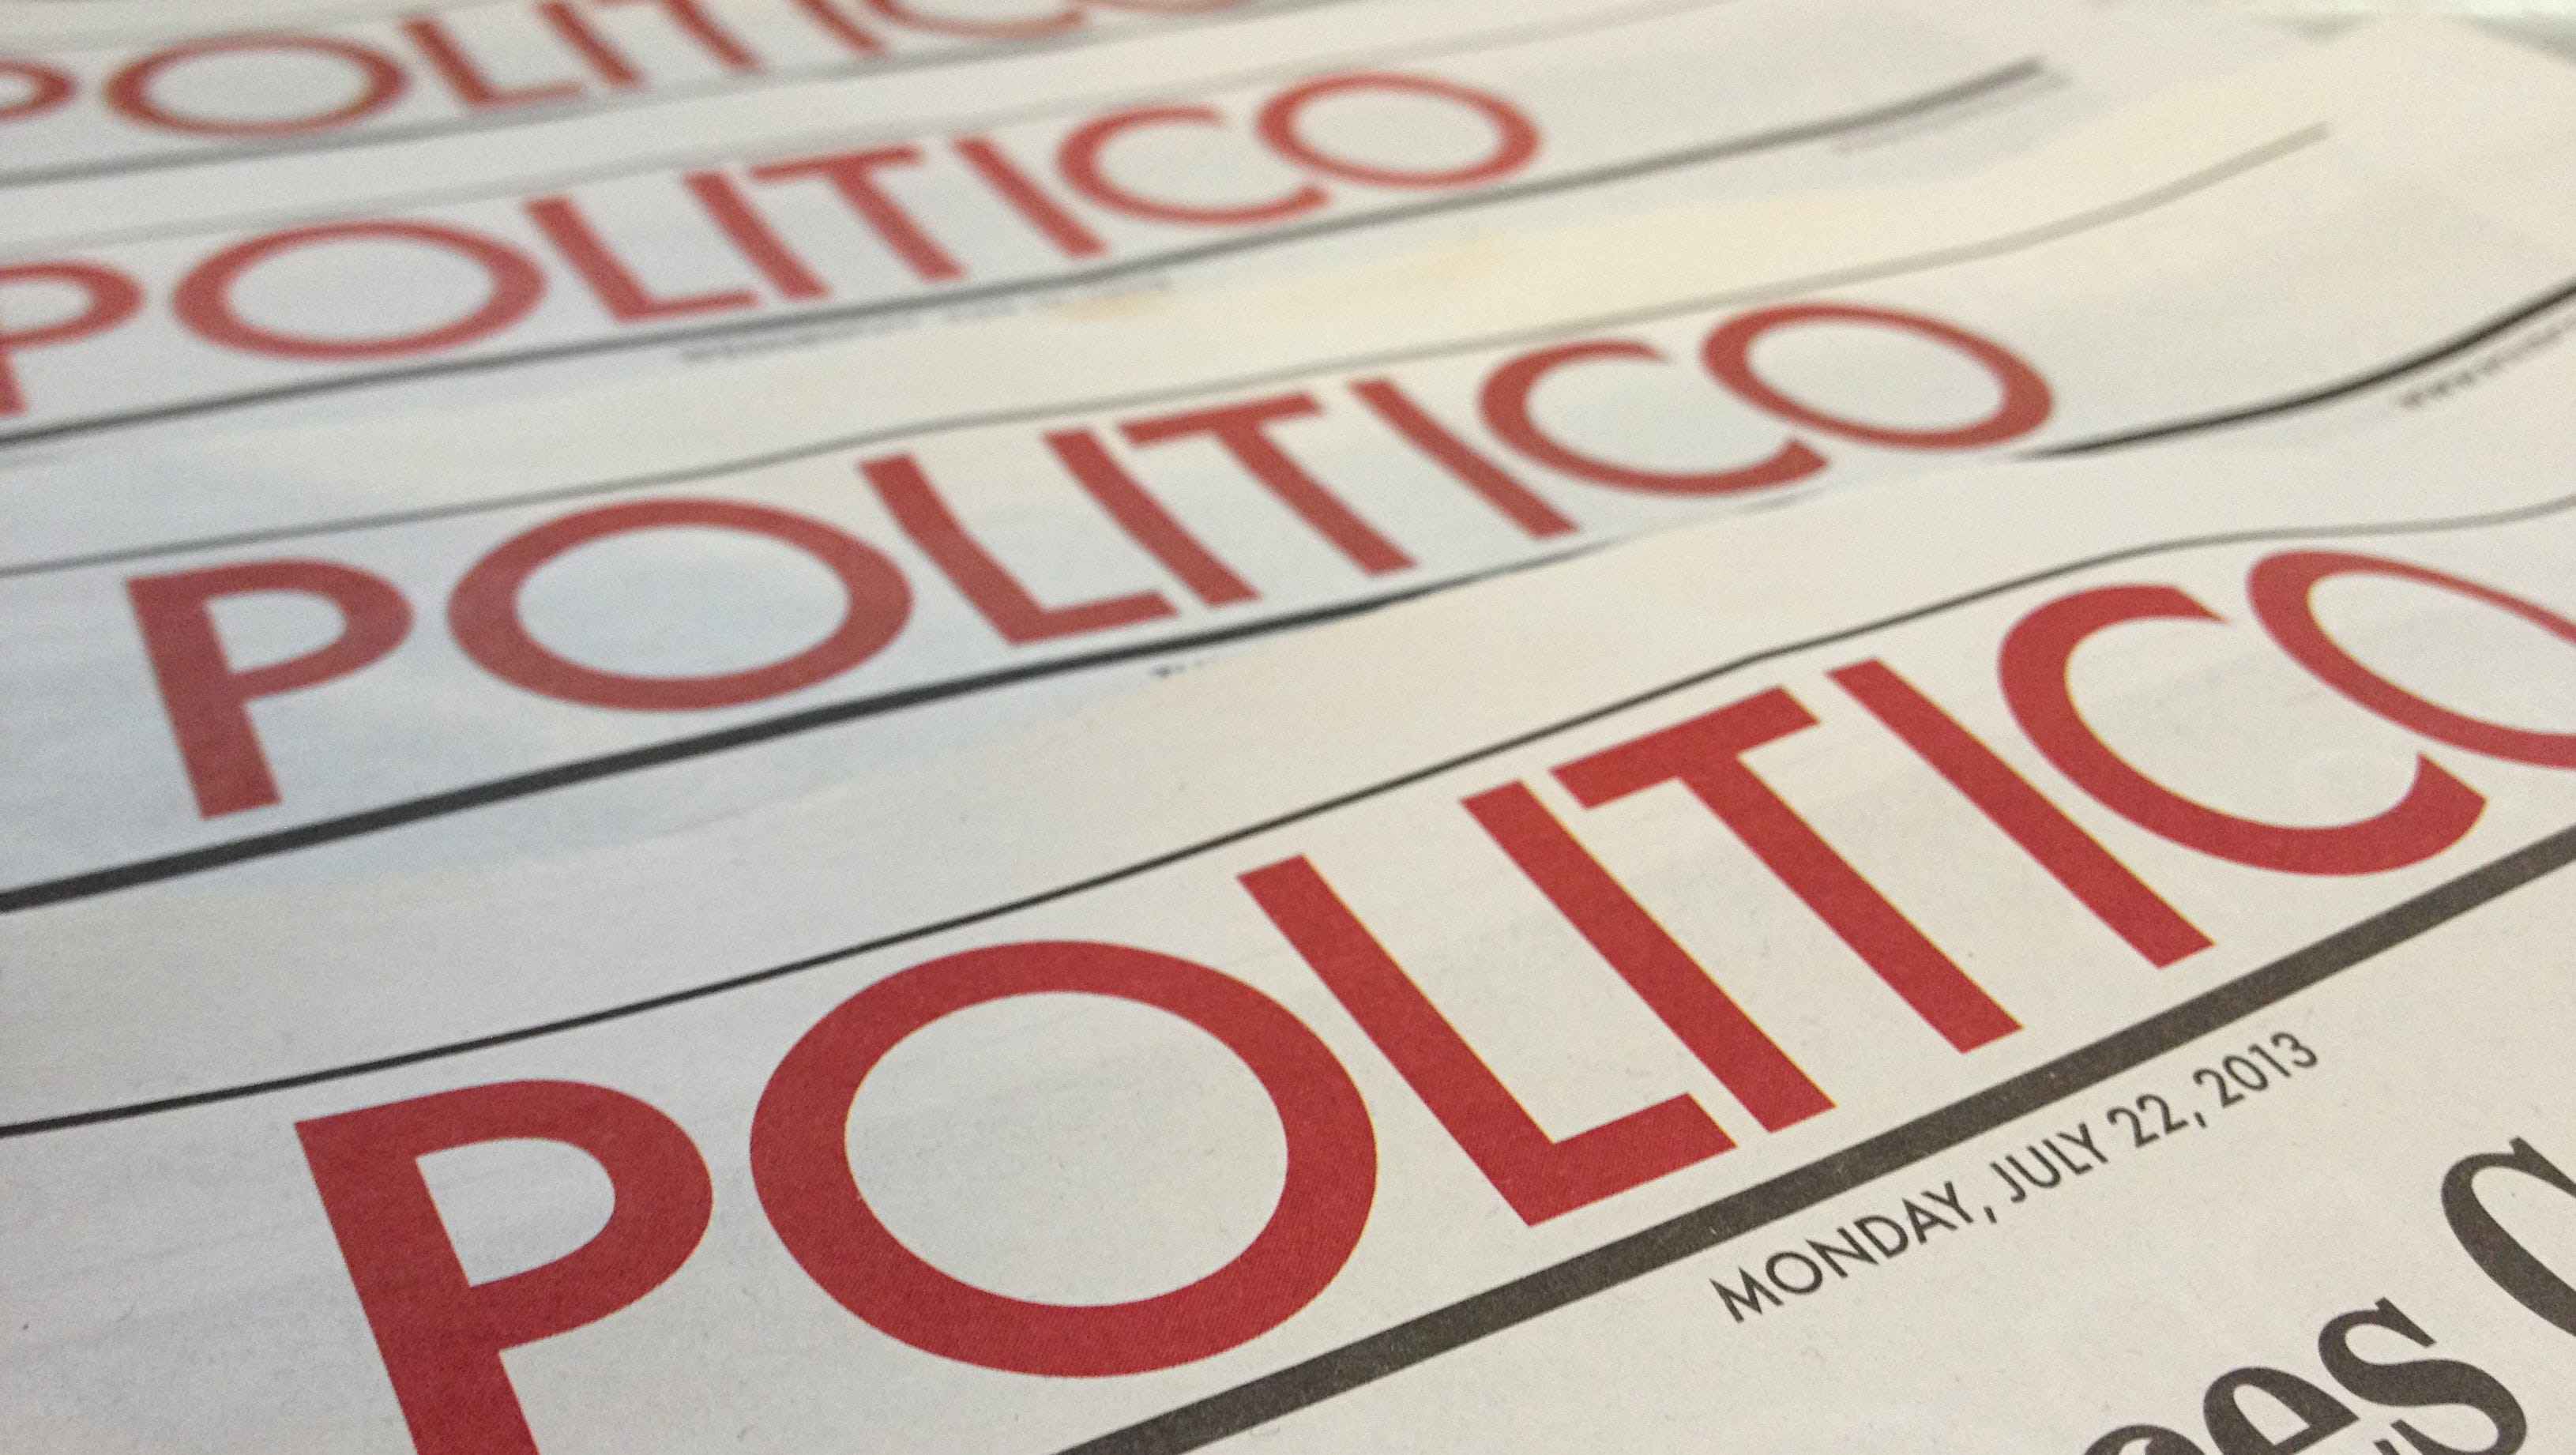 Politico 'dreams' of opening more bureaus in capital cities